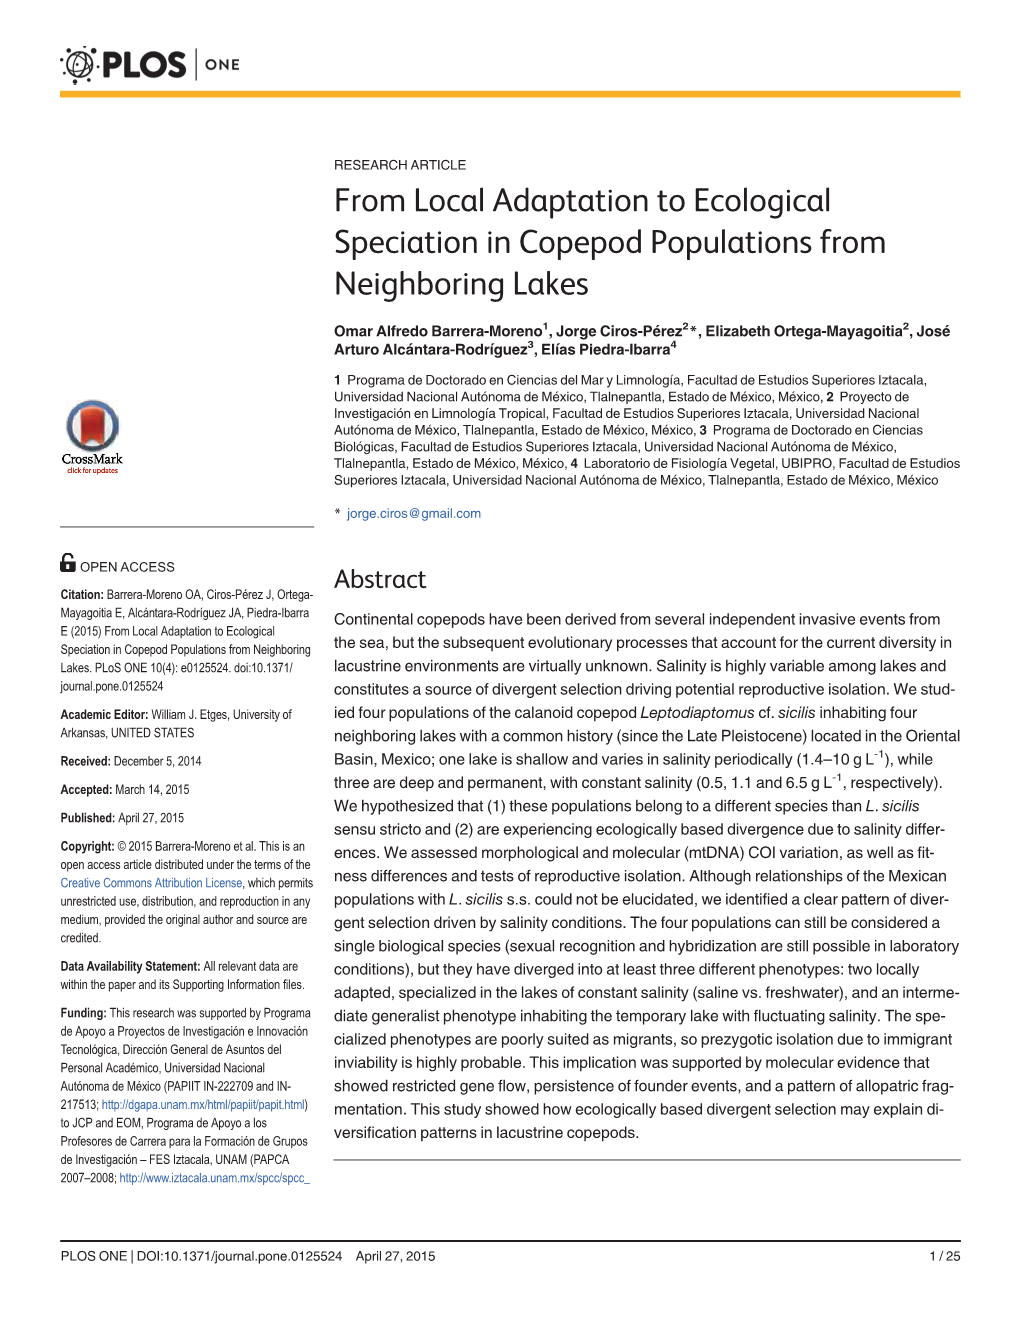 From Local Adaptation to Ecological Speciation in Copepod Populations from Neighboring Lakes